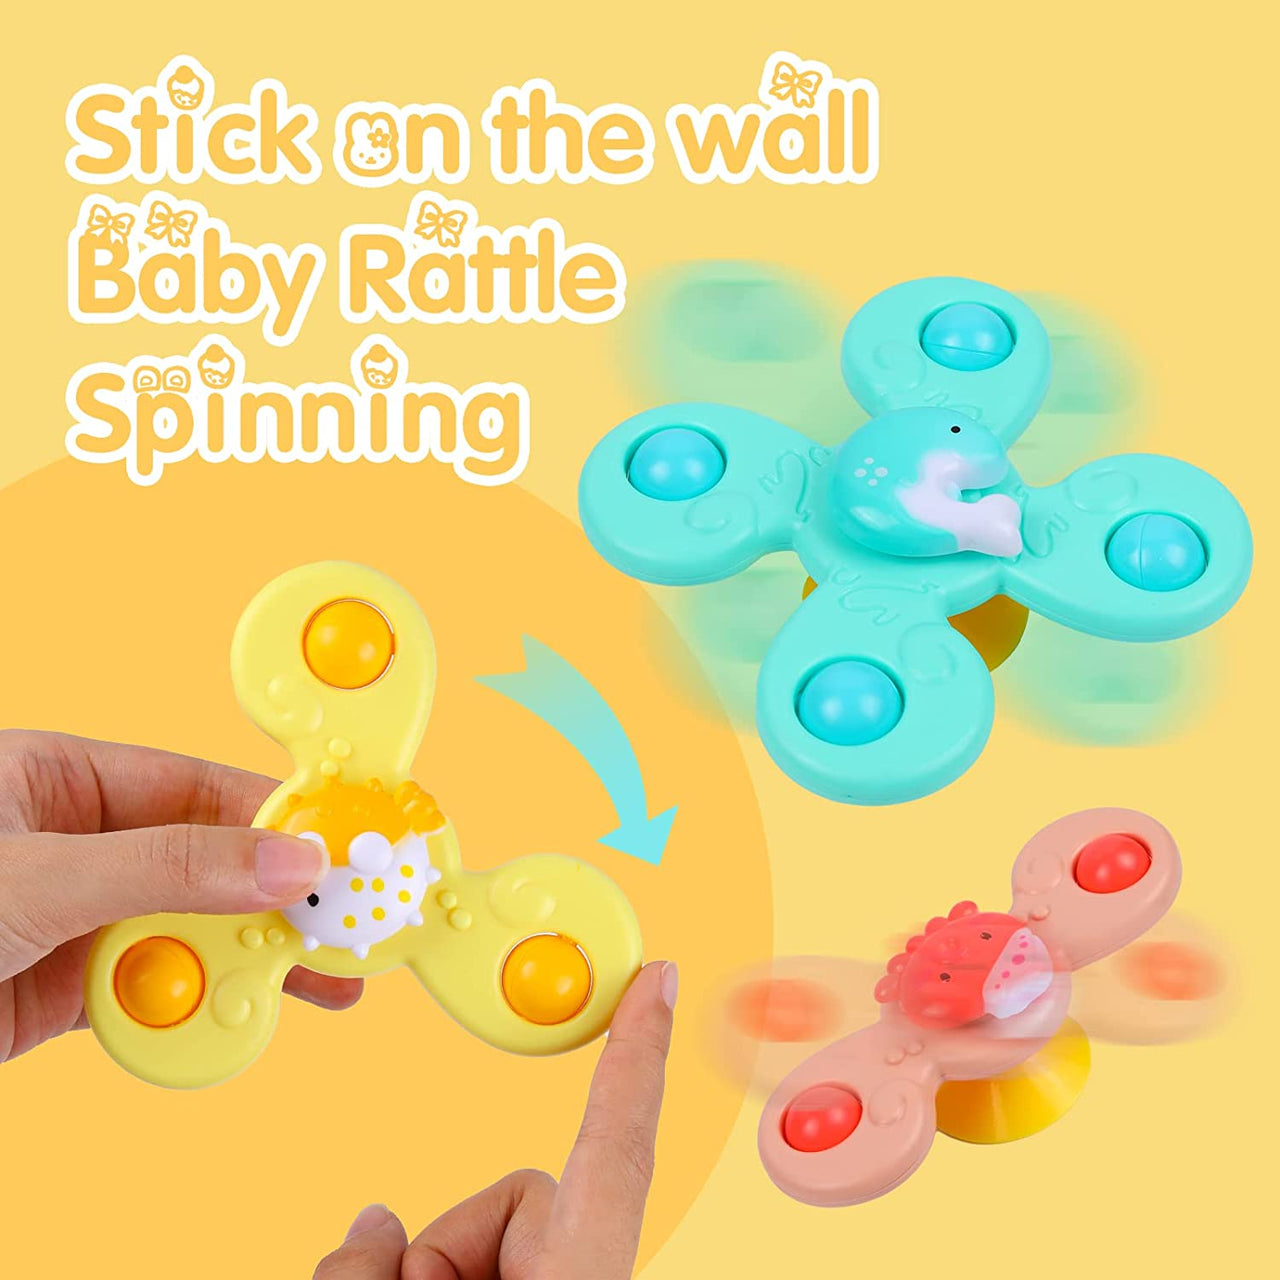 Pack of 3 New Born Baby Rattle Spinners